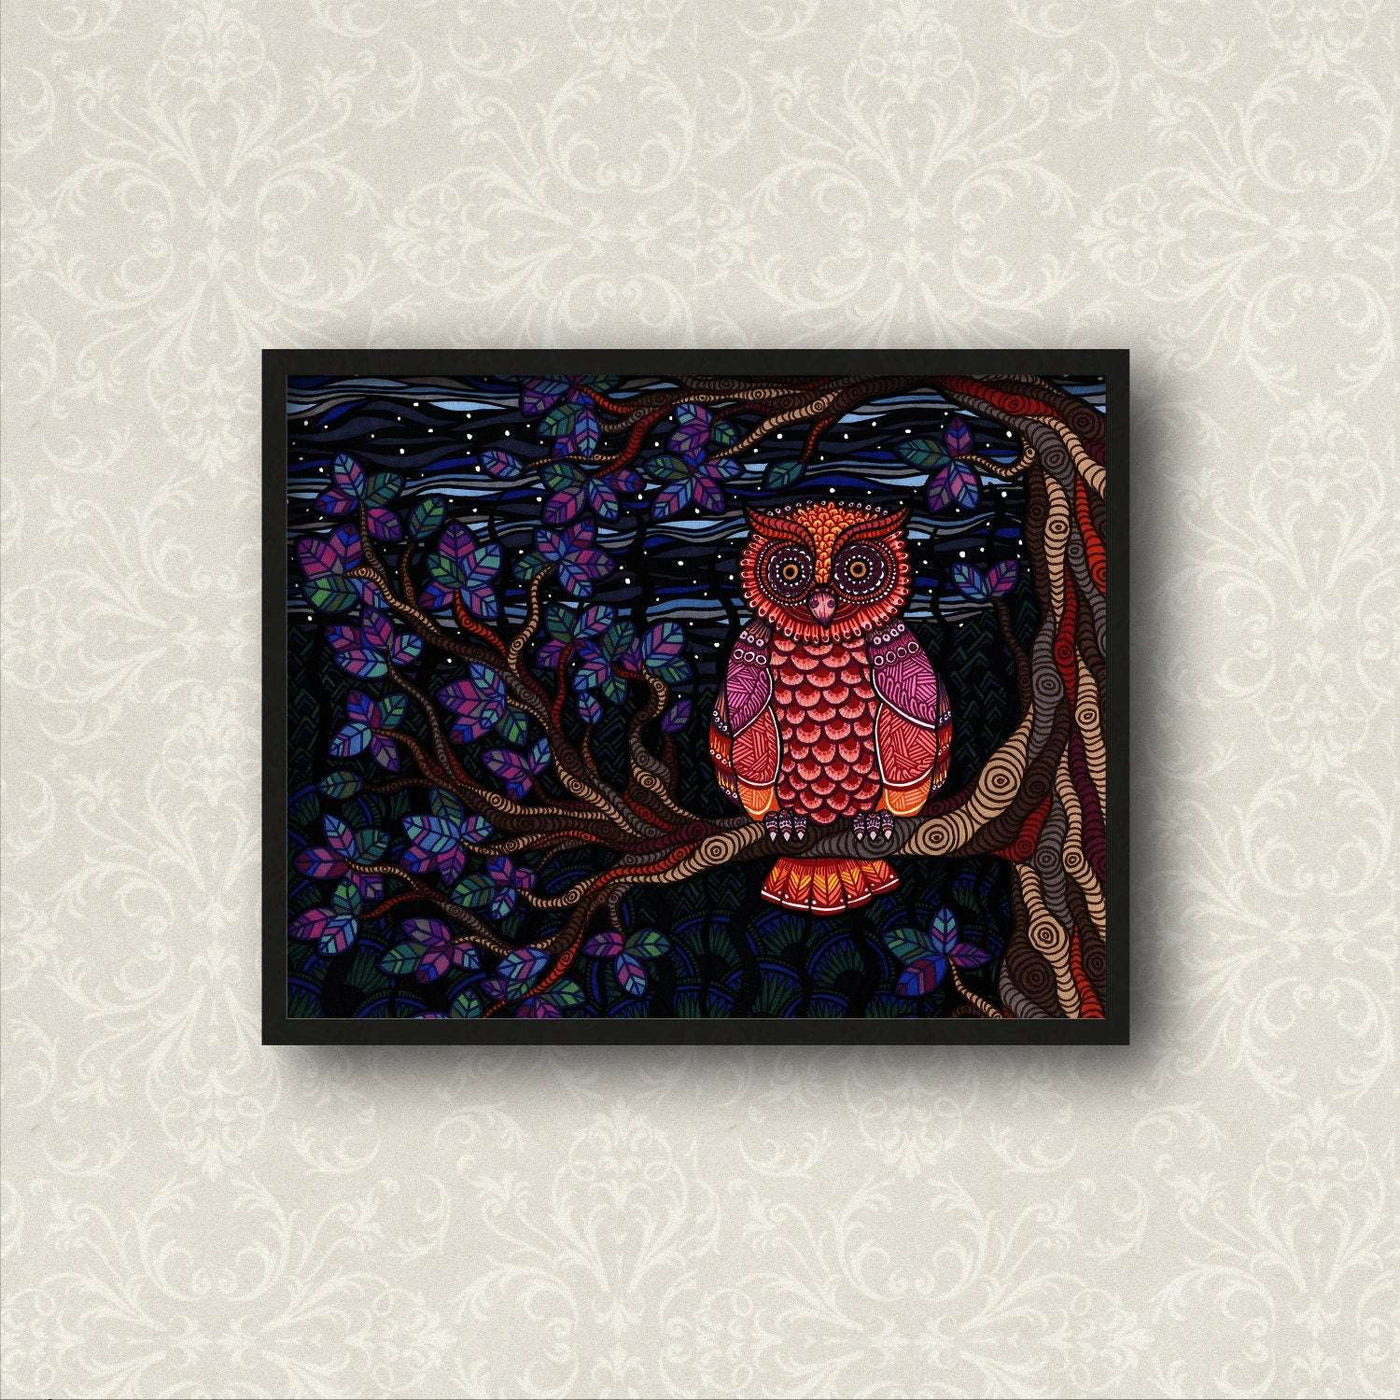 A vibrant fine art print of the Owl Tree by Art by Amanda Lanford, featuring intricate Zentangles and colorful leaves against a dark background, displayed on a patterned wall.